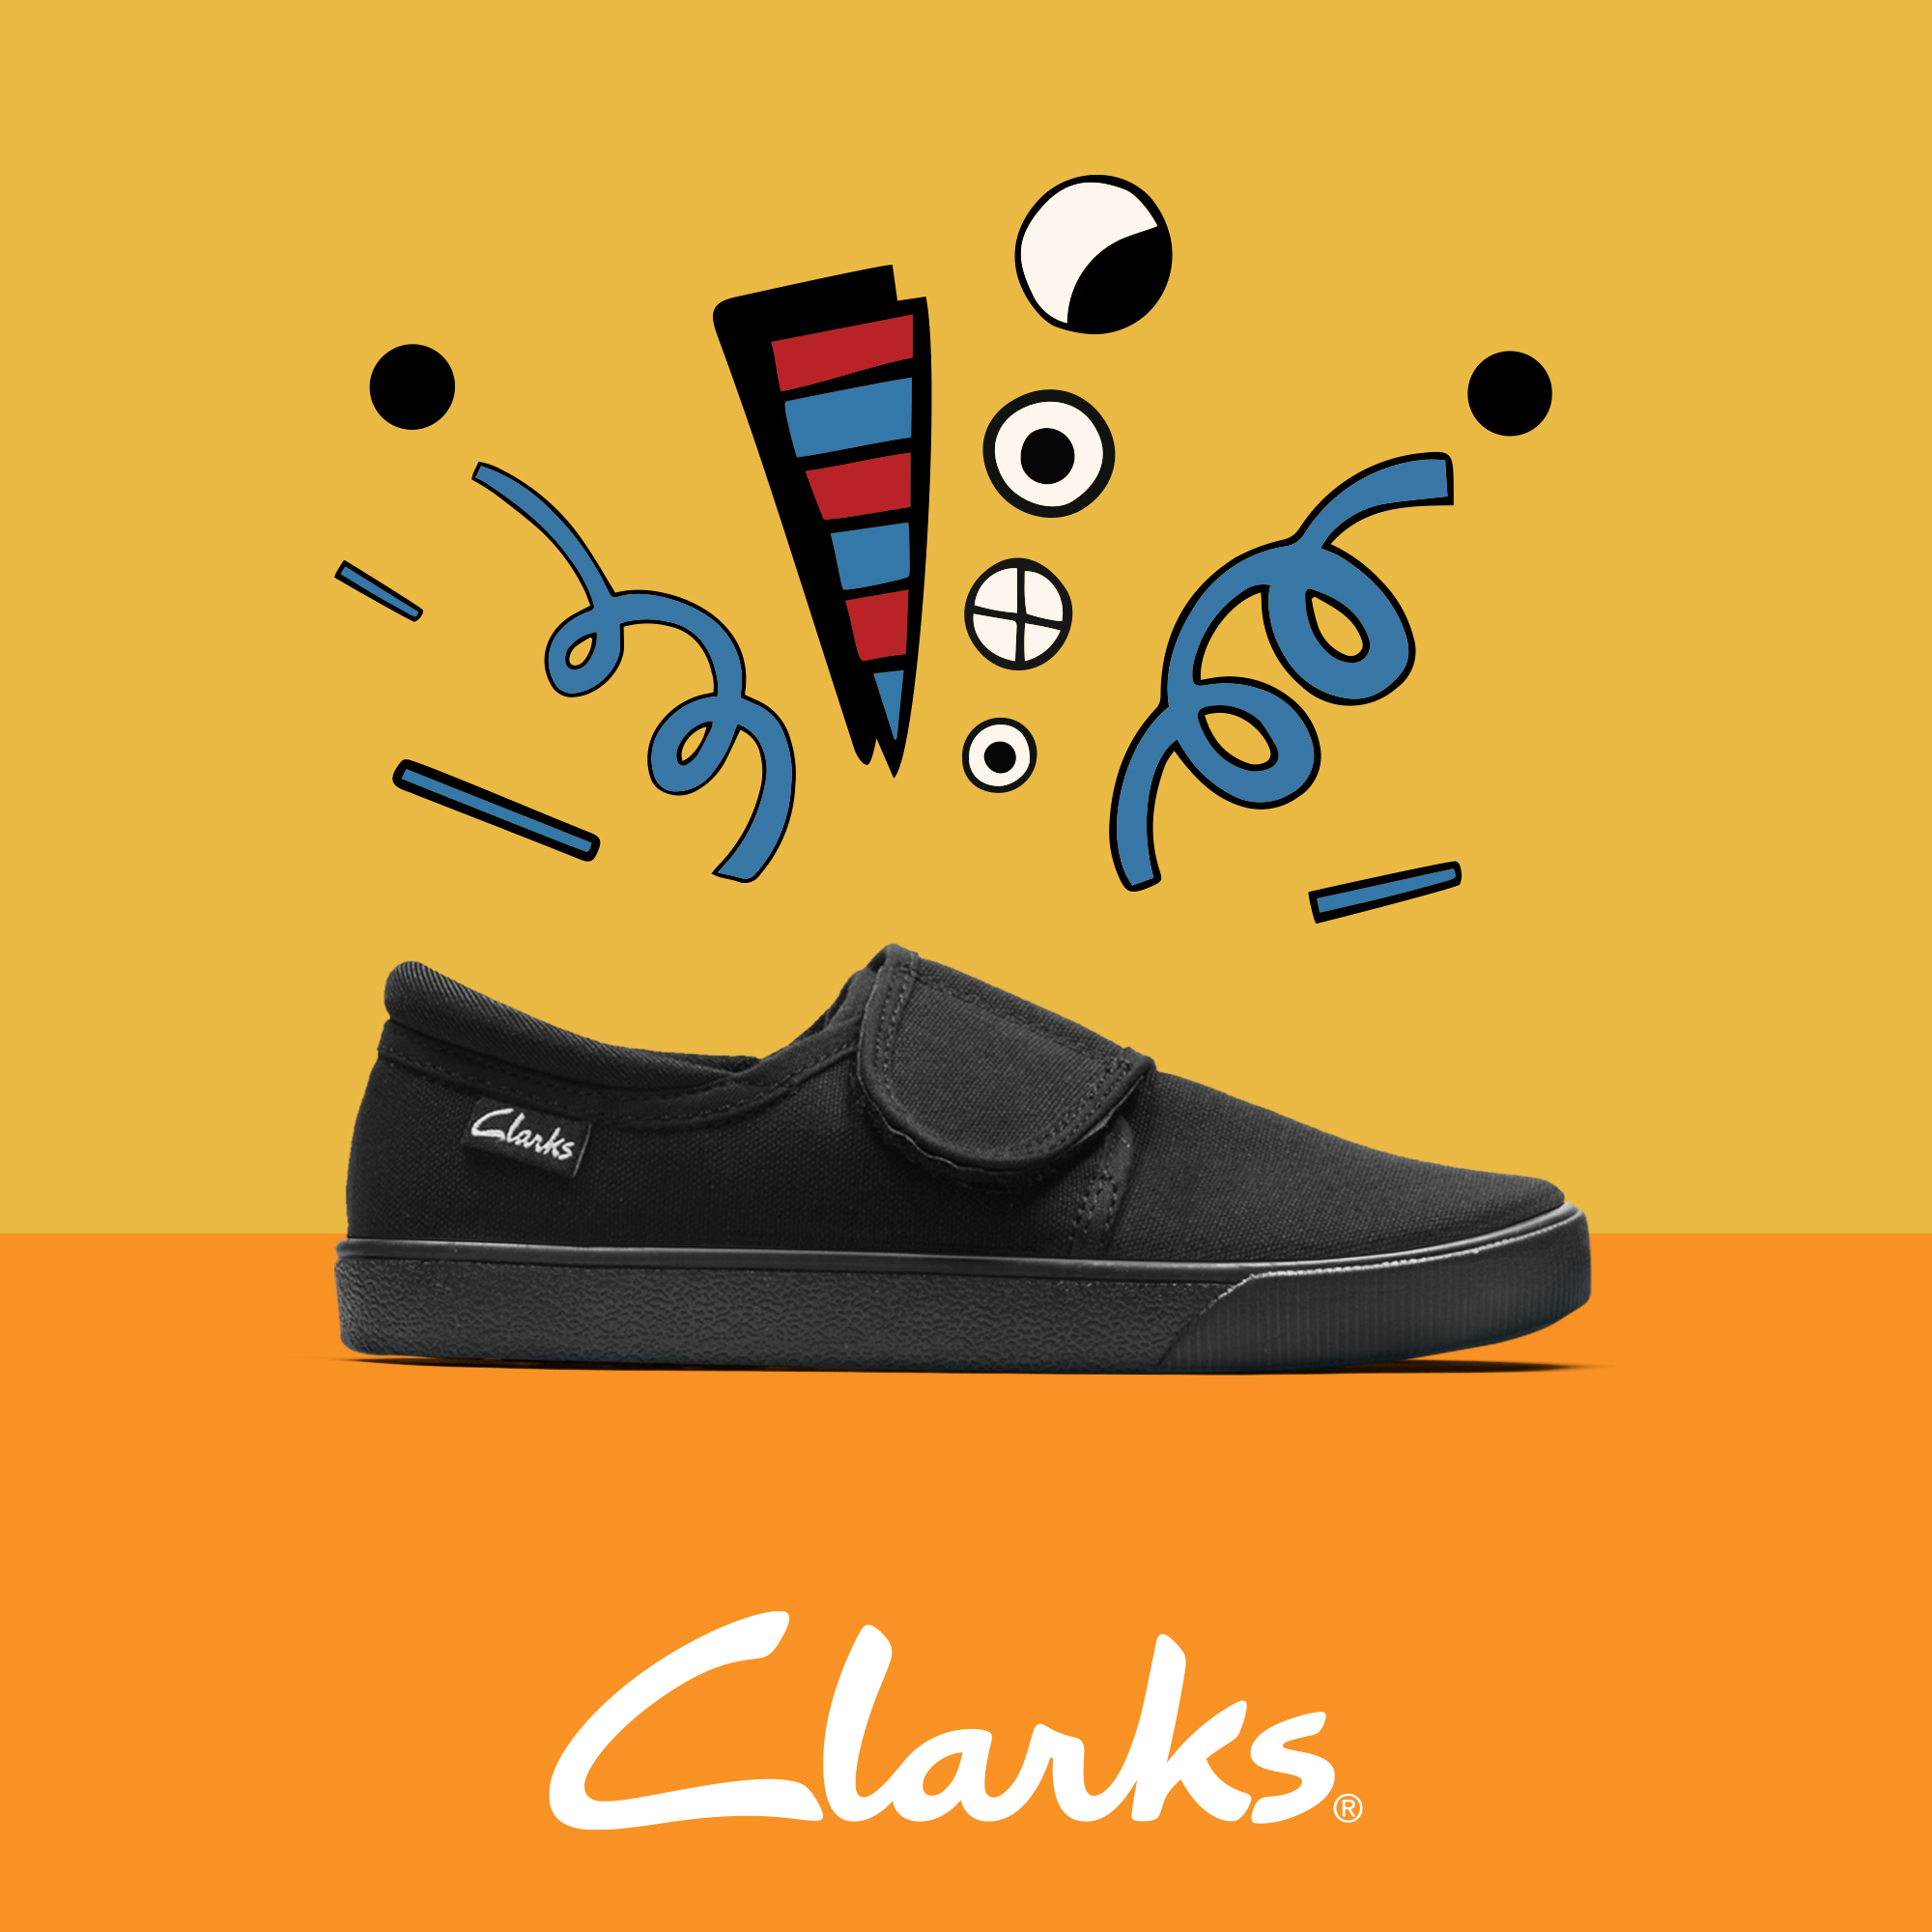 clarks bluewater opening times